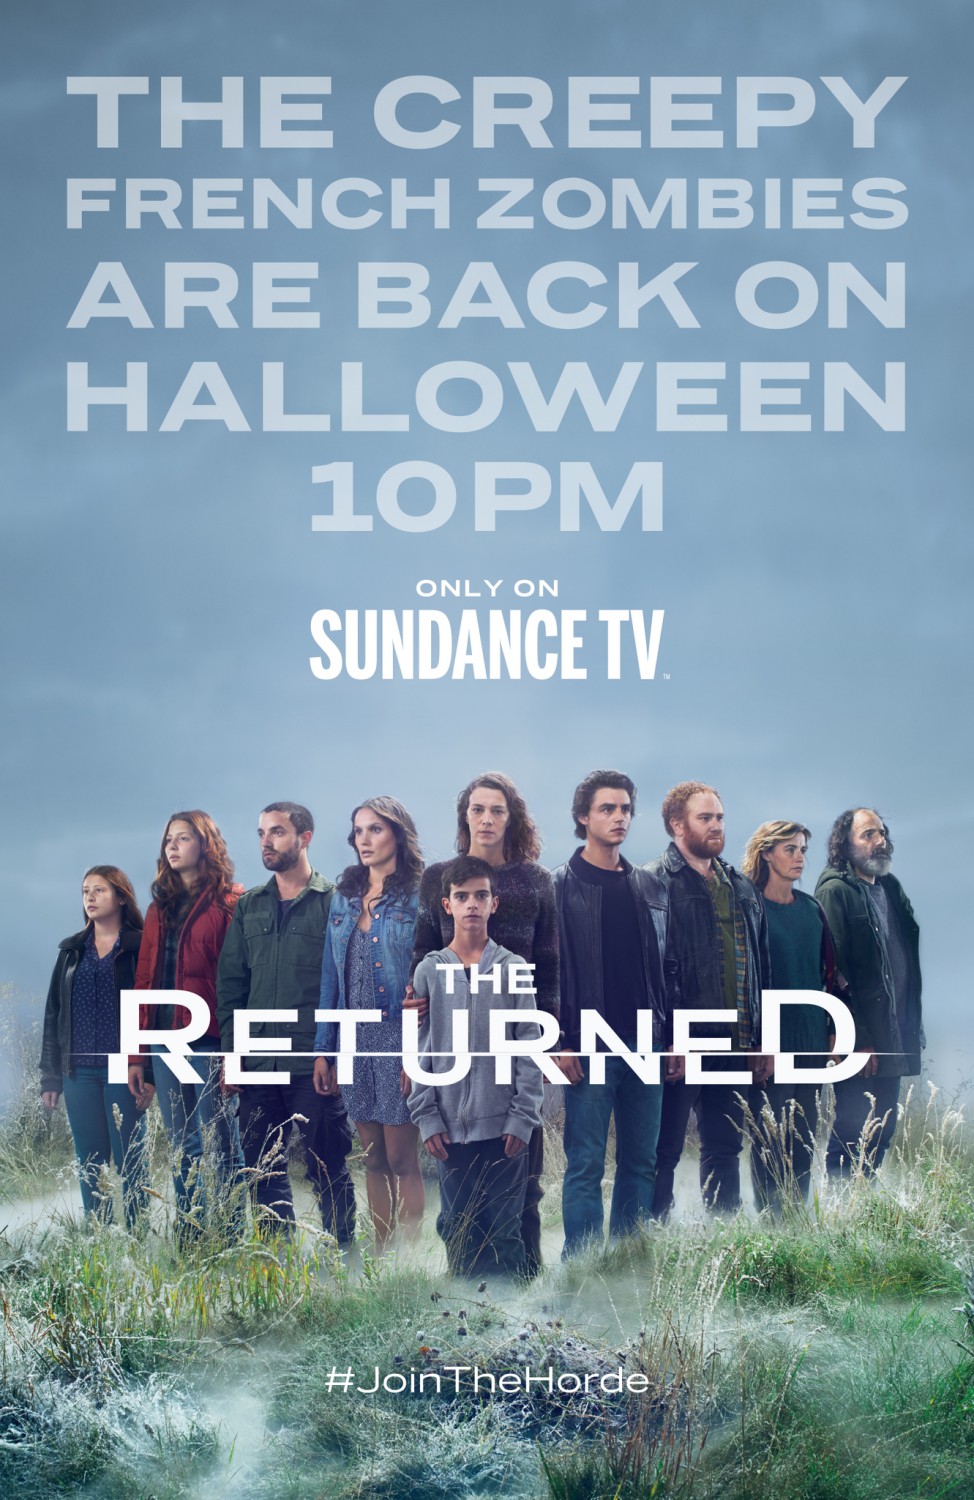 Extra Large TV Poster Image for Les Revenants (#7 of 7)